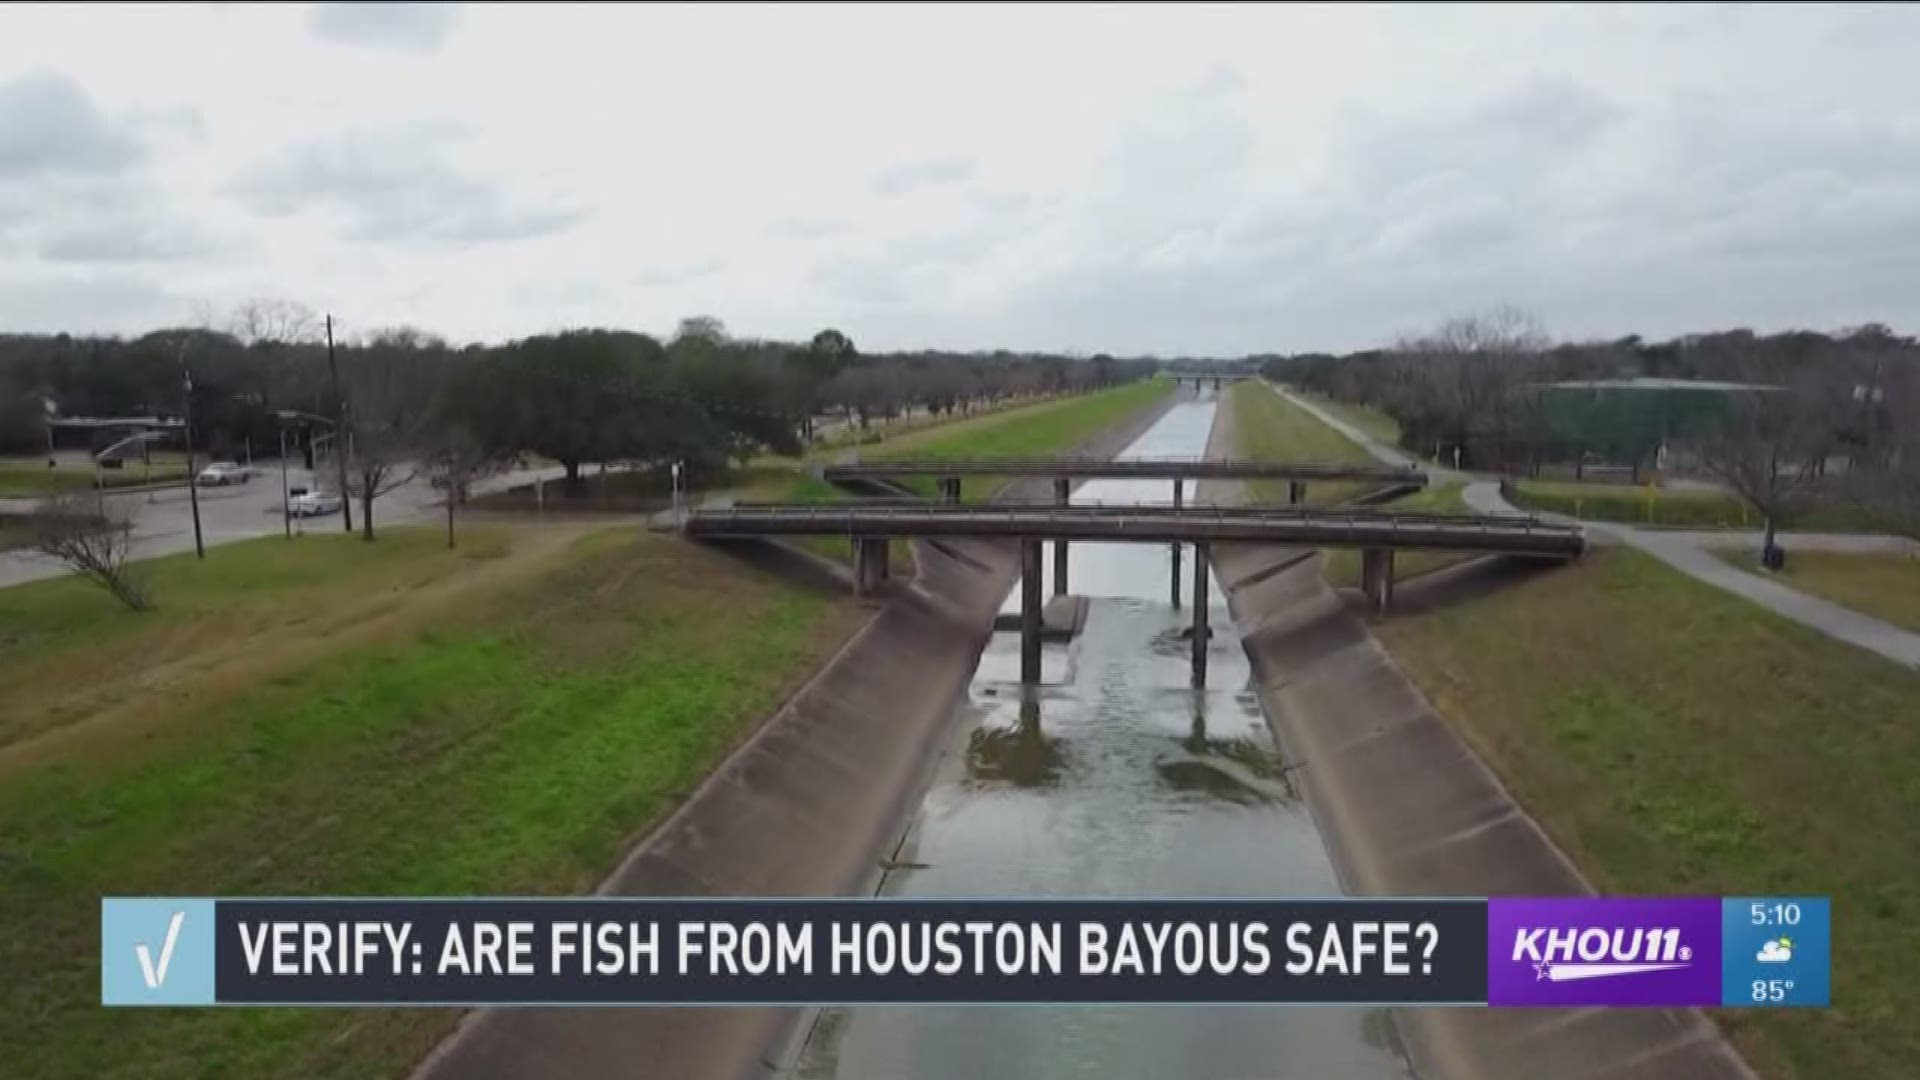 An email sent to the KHOU 11 newsroom Monday morning asked if the fish from Houston's bayous were safe to eat.